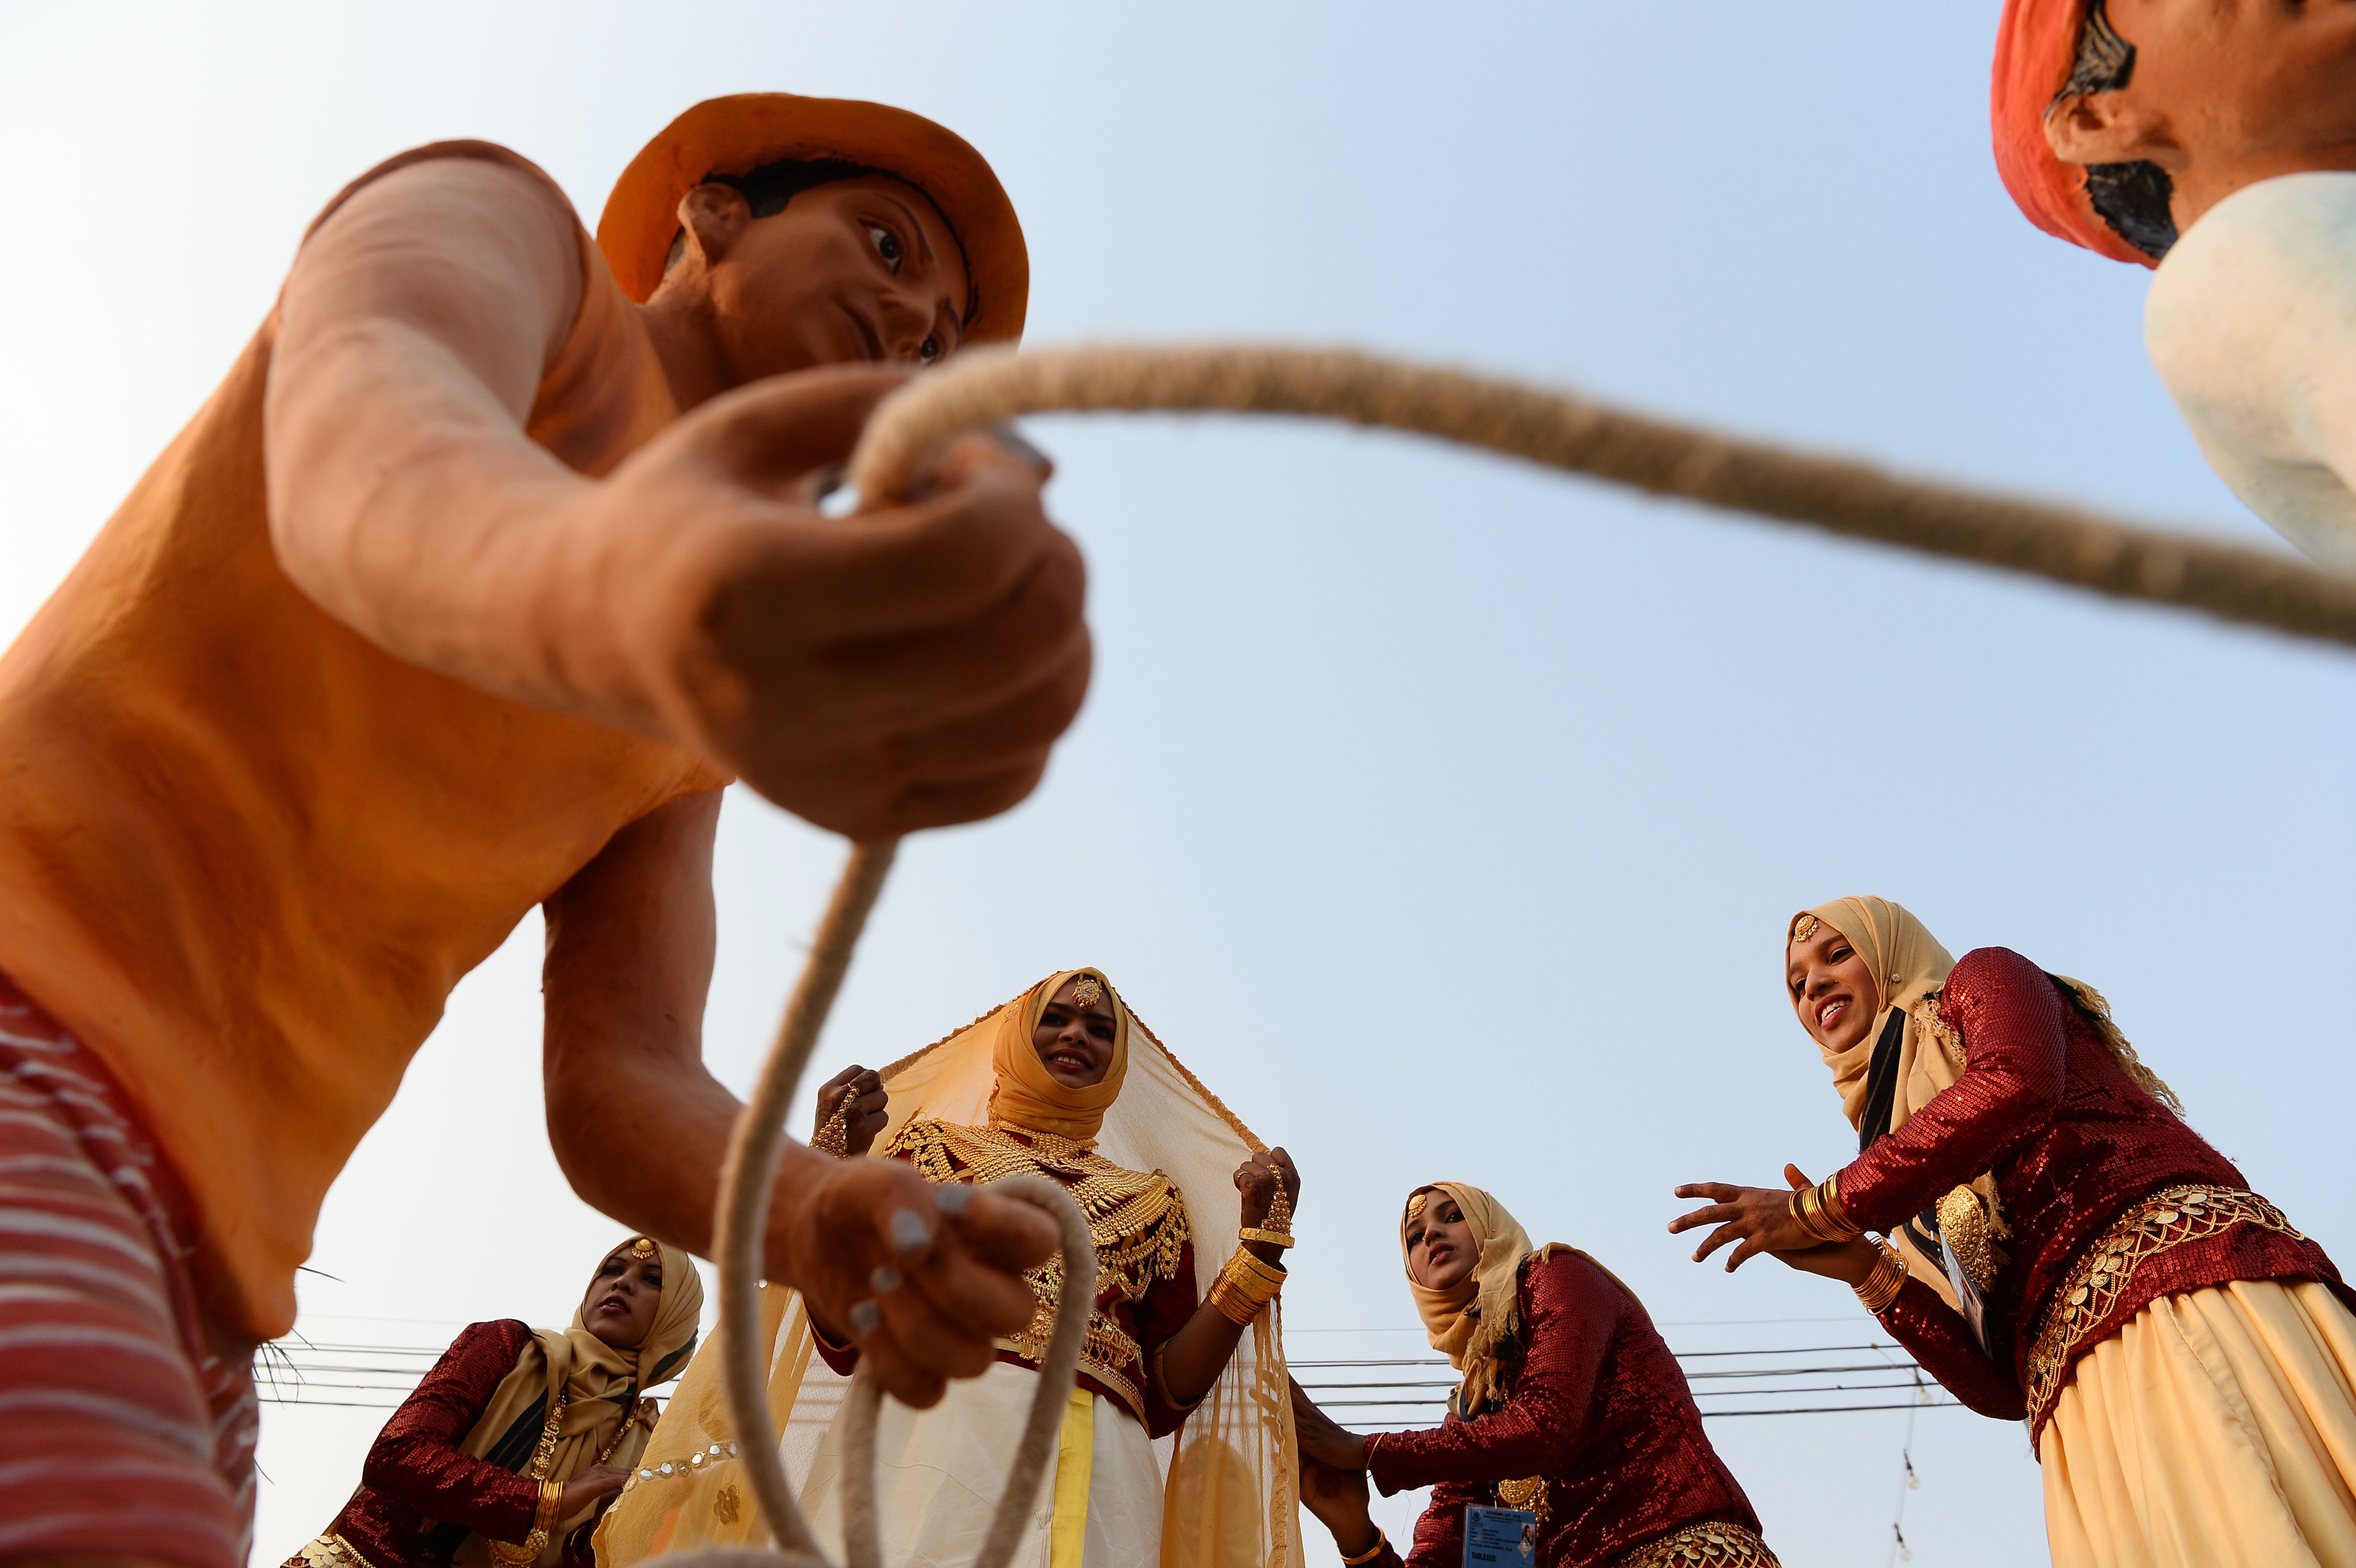 Artists from Lakshadweep perform during a press preview of floats participating in the forthcoming Republic Day parade in New Delhi on January 22, 2018. (SAJJAD HUSSAIN/AFP via Getty Images)